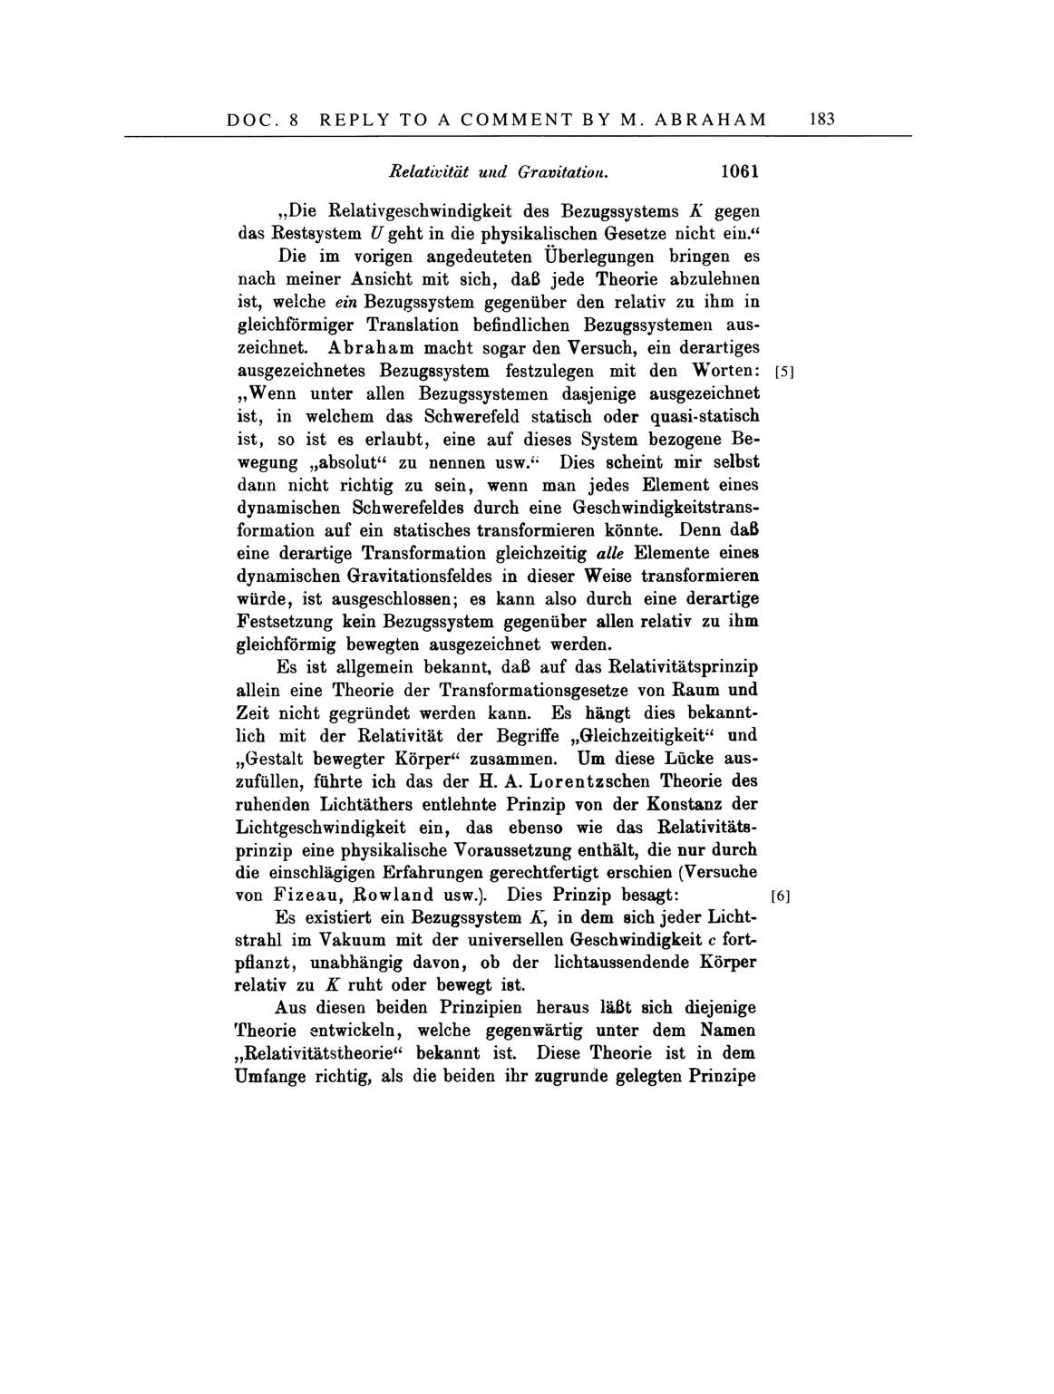 Volume 4: The Swiss Years: Writings 1912-1914 page 183